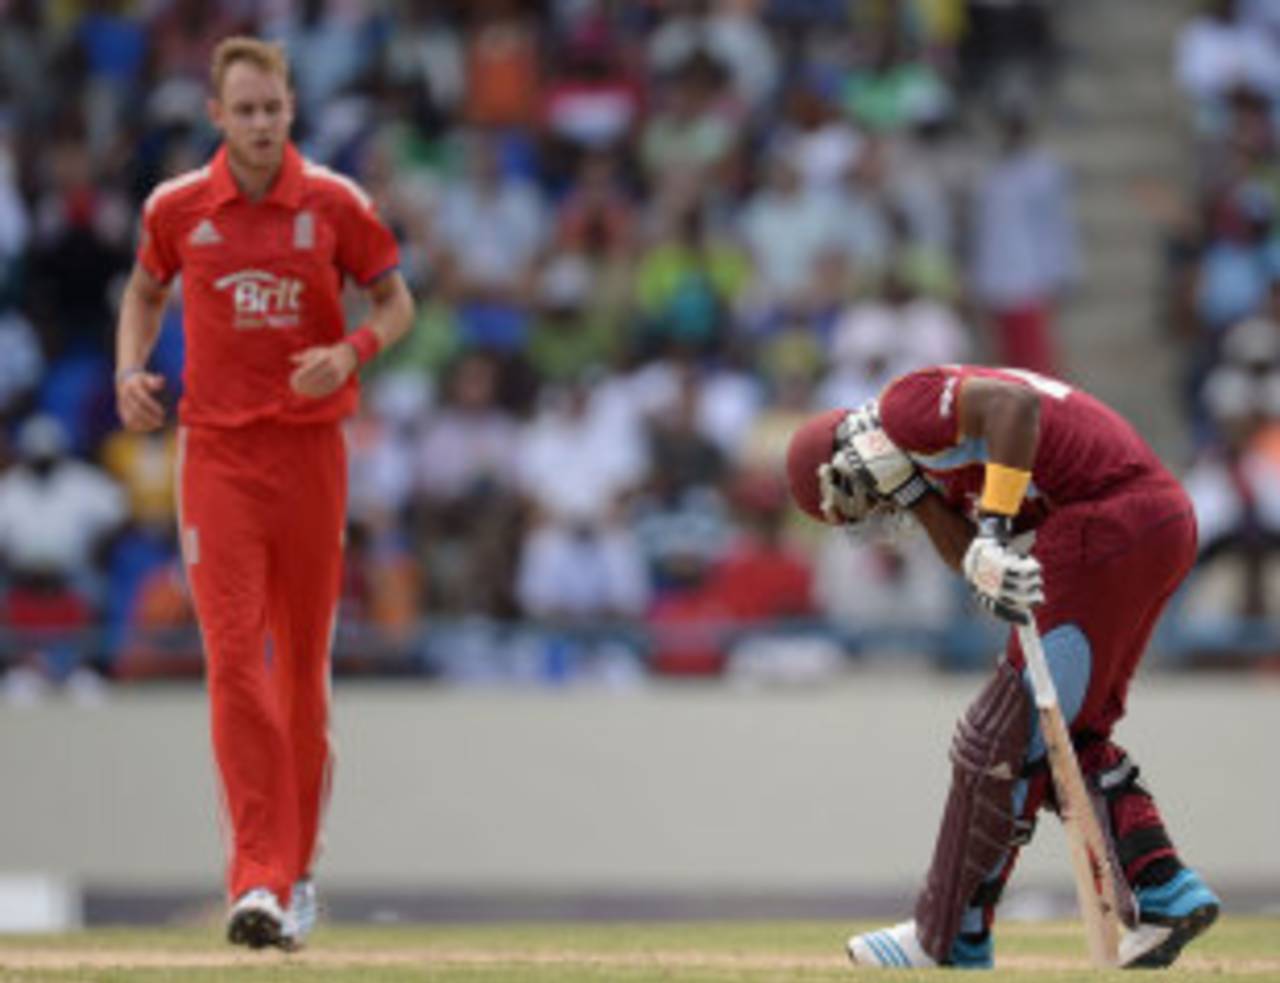 Stuart Broad struck Dwayne Bravo a painful blow on the head, West Indies v England, 2nd ODI, North Sound, March 2, 2014